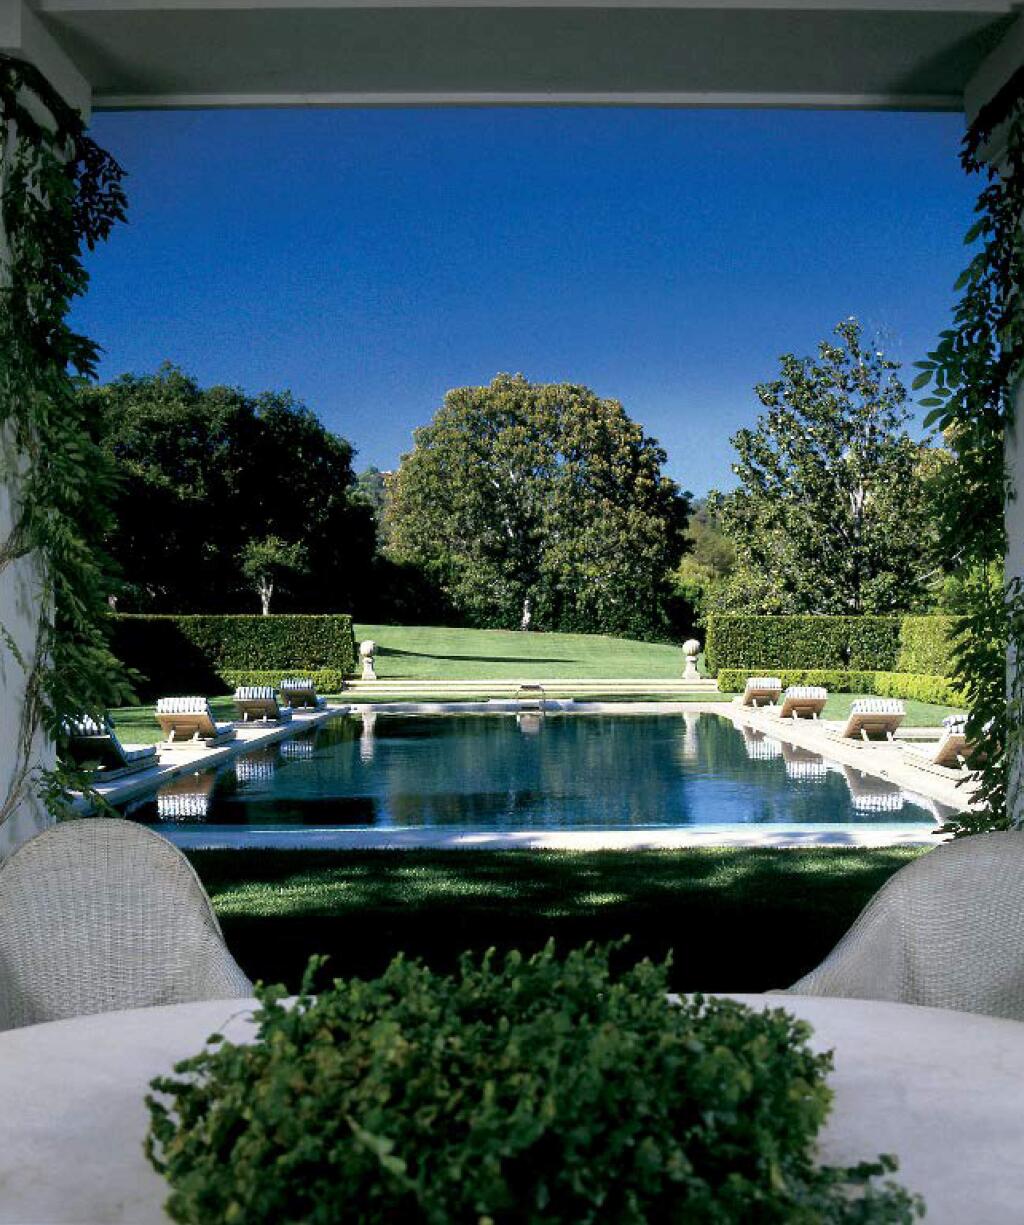 In a photo provided by Jeff Hyland, David Geffen paid $47.5 million for the Warner Estate in 1990. Setting a new high for a home sold in California, Bezos is paying $165 million for the Beverly Hills estate owned by David Geffen, the media mogul and co-founder of DreamWorks, according to two people familiar with the purchase. (Jeff Hyland via The New York Times) -- NO SALES; FOR EDITORIAL USE ONLY WITH NYT STORY CALIF BEZOS HOME BY CANDACE JACKSON FOR FEB. 14, 2020. ALL OTHER USE PROHIBITED. --